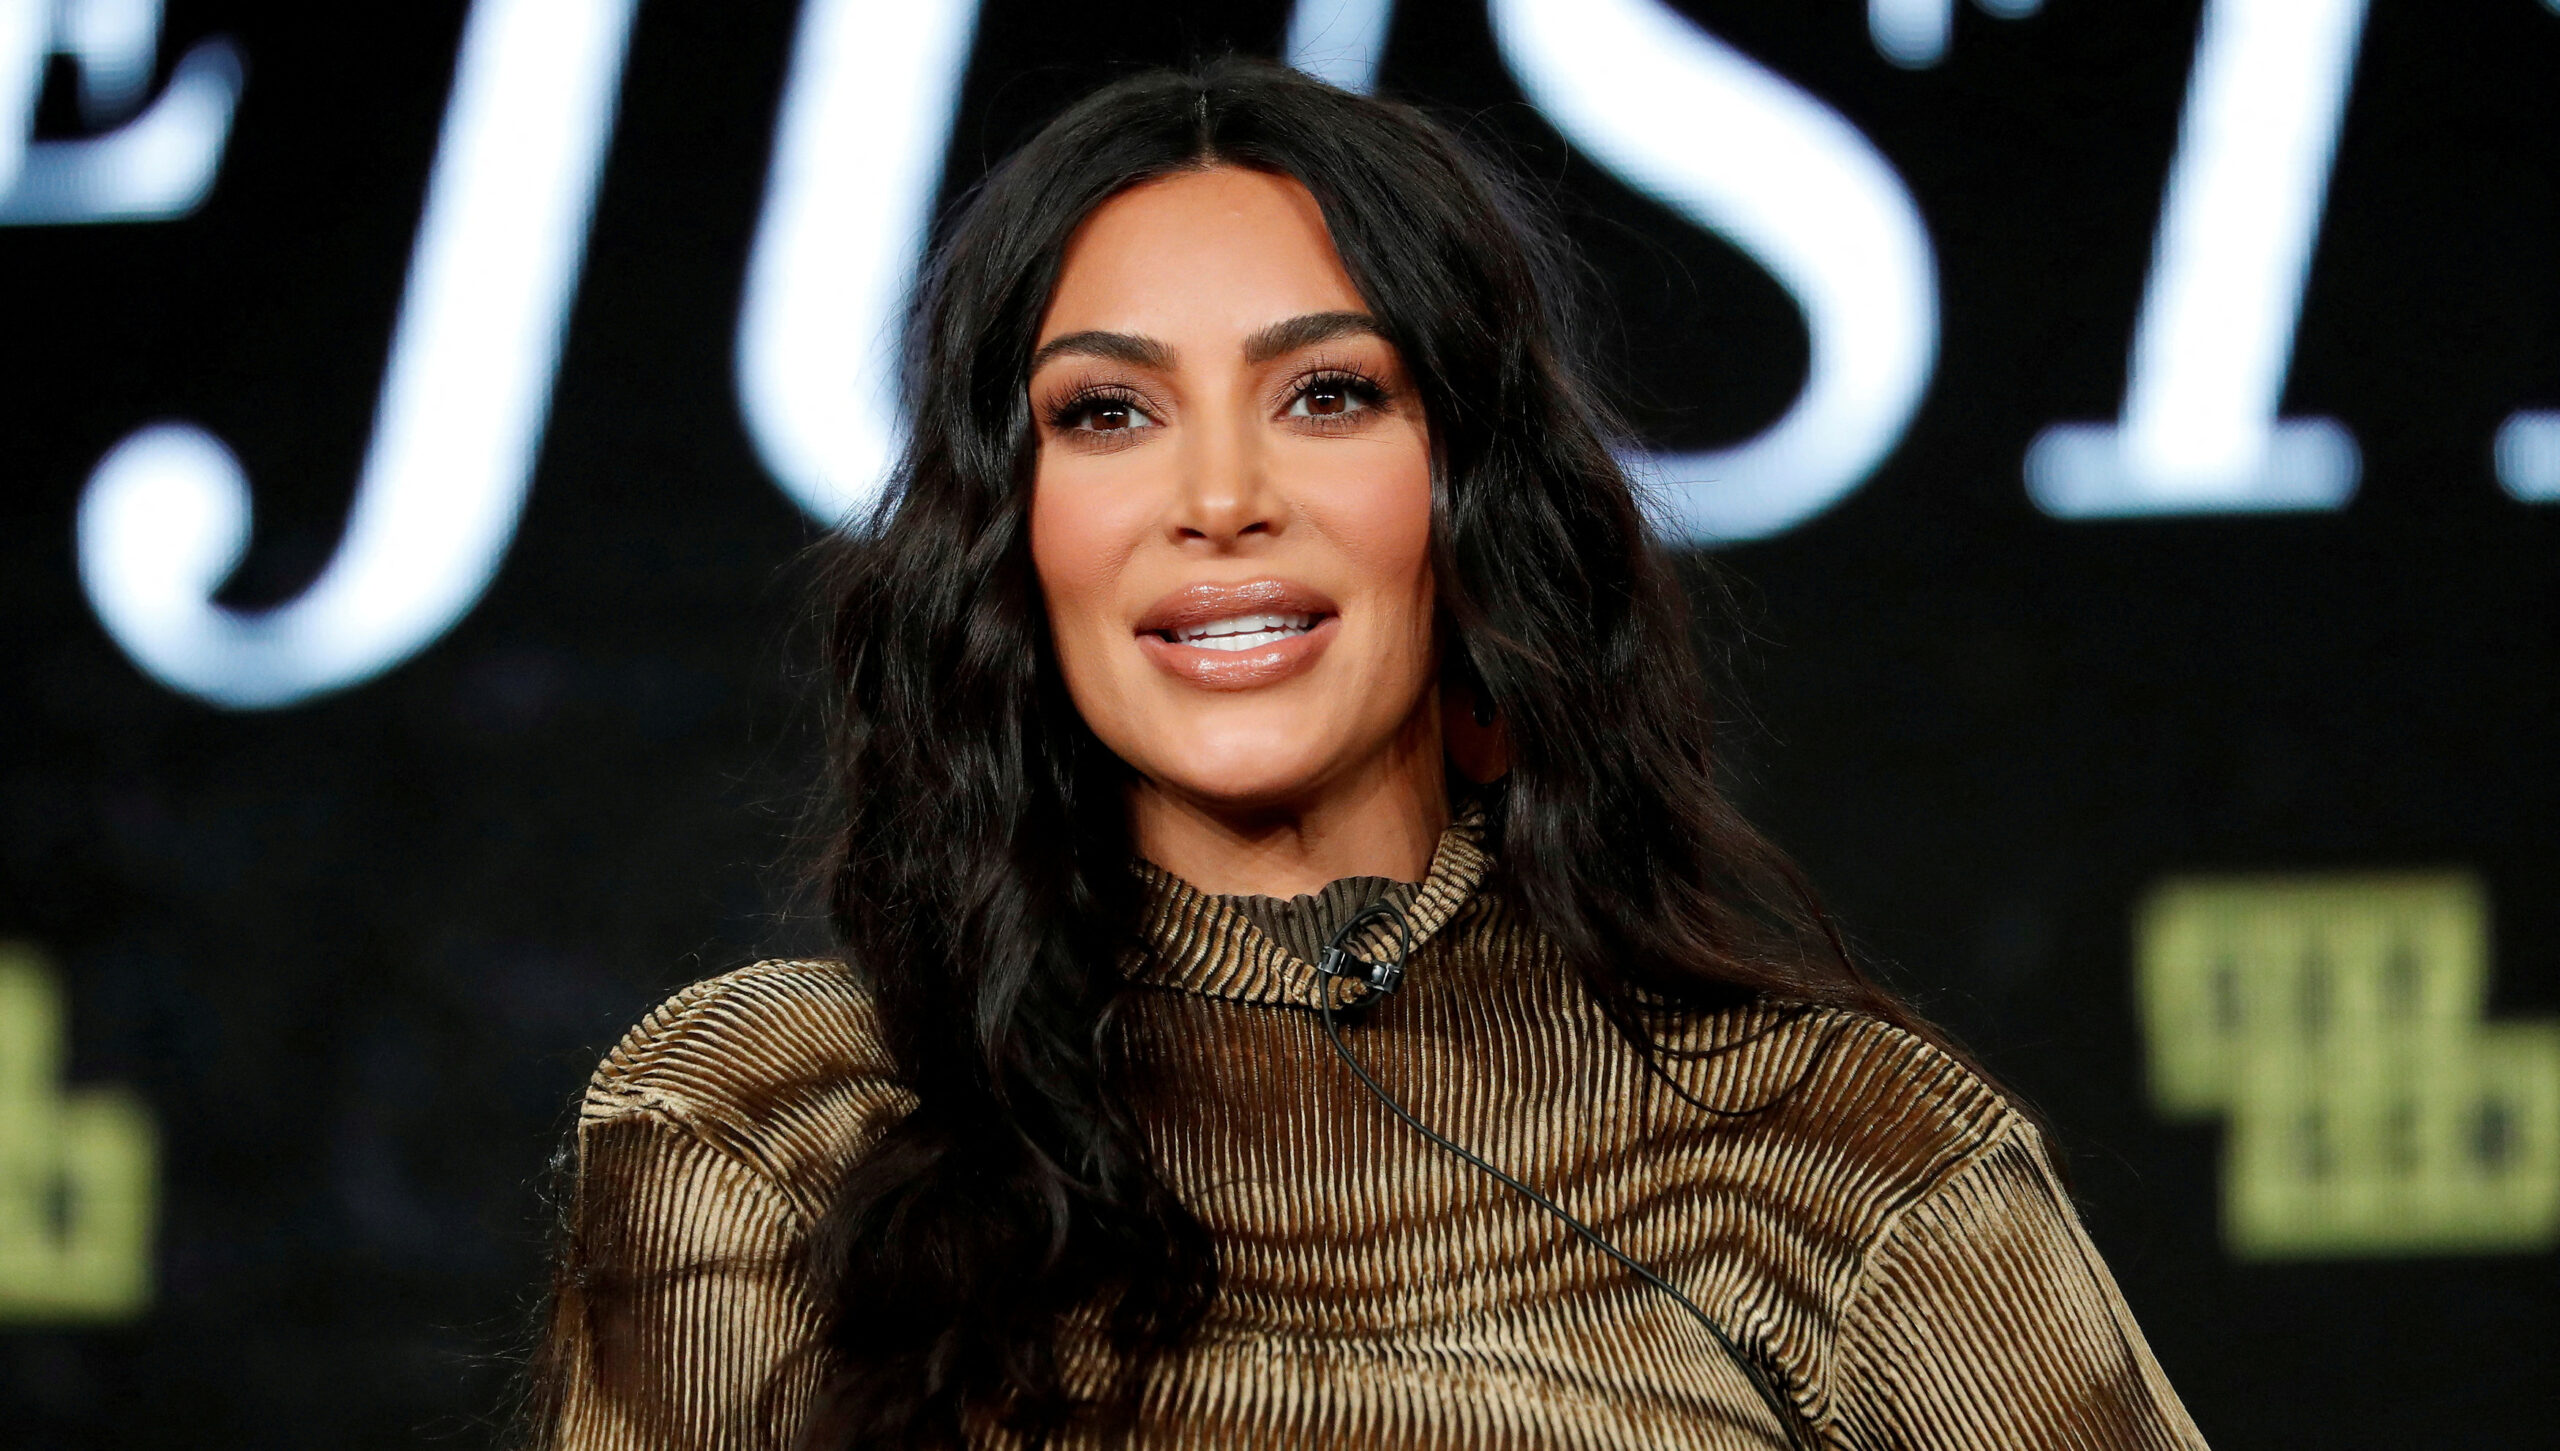 Kim Kardashian launched a private equity firm